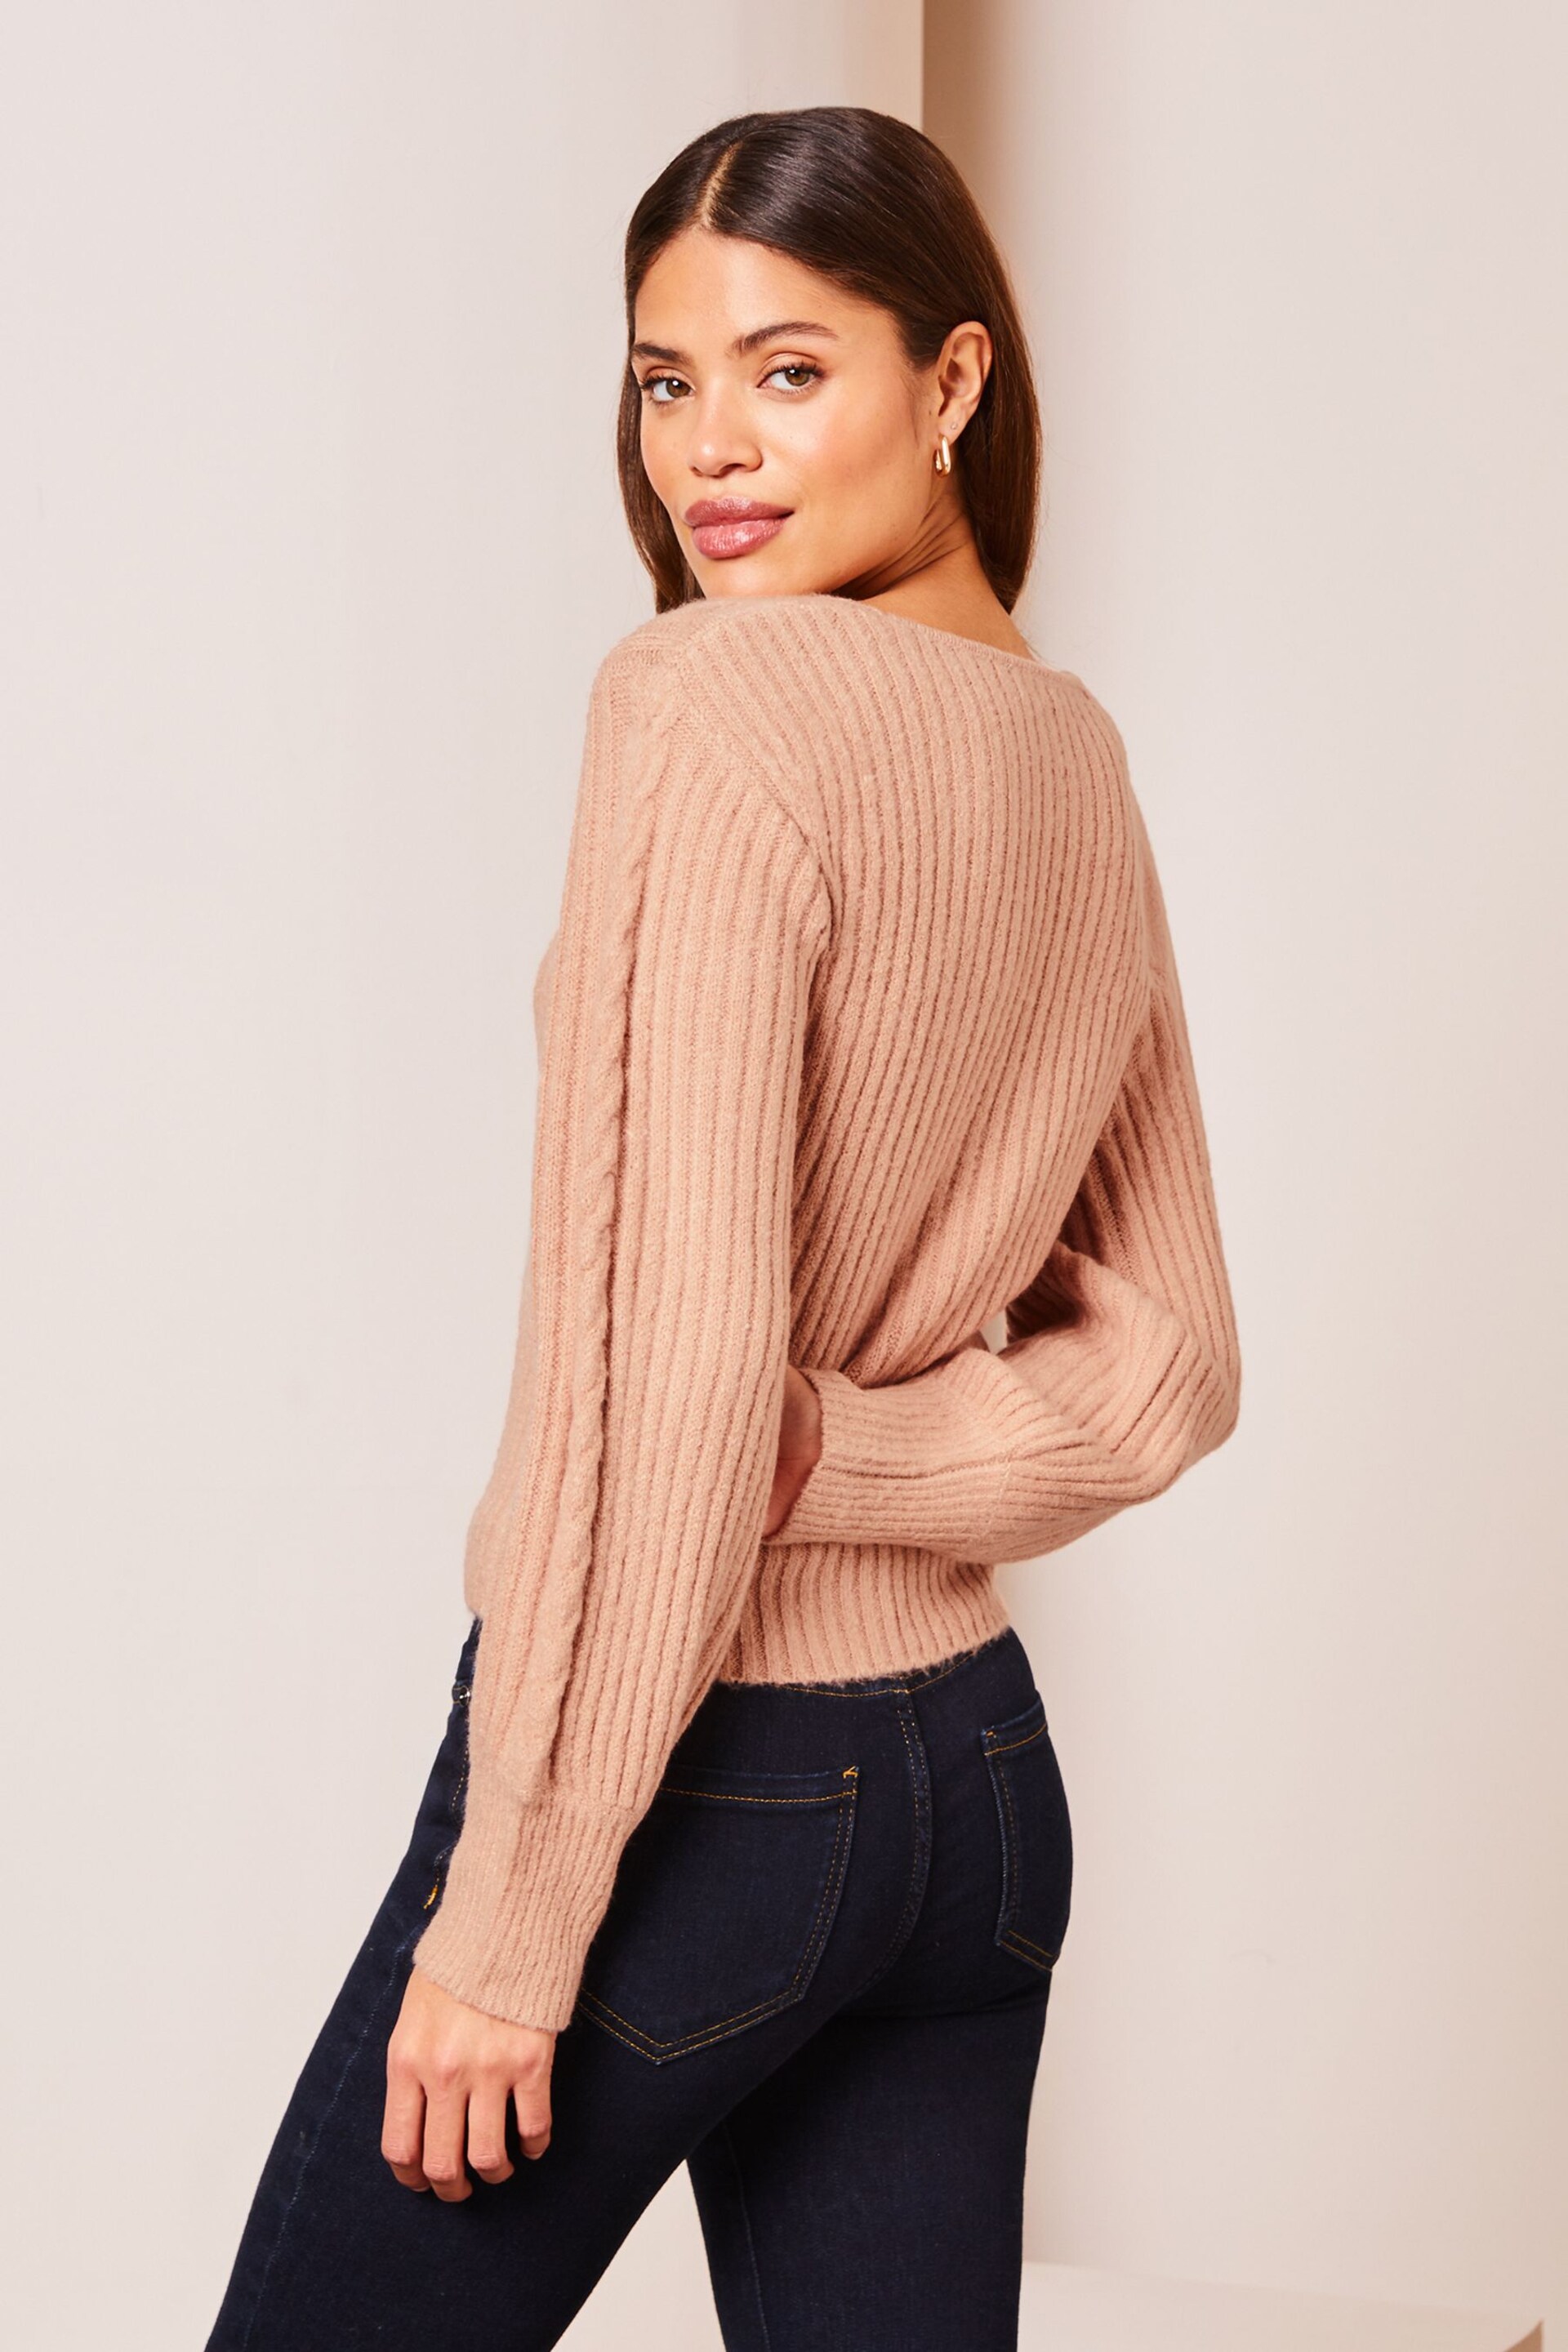 Lipsy Pale Pink Petite V Neck Cable Knitted Jumper - Image 2 of 4